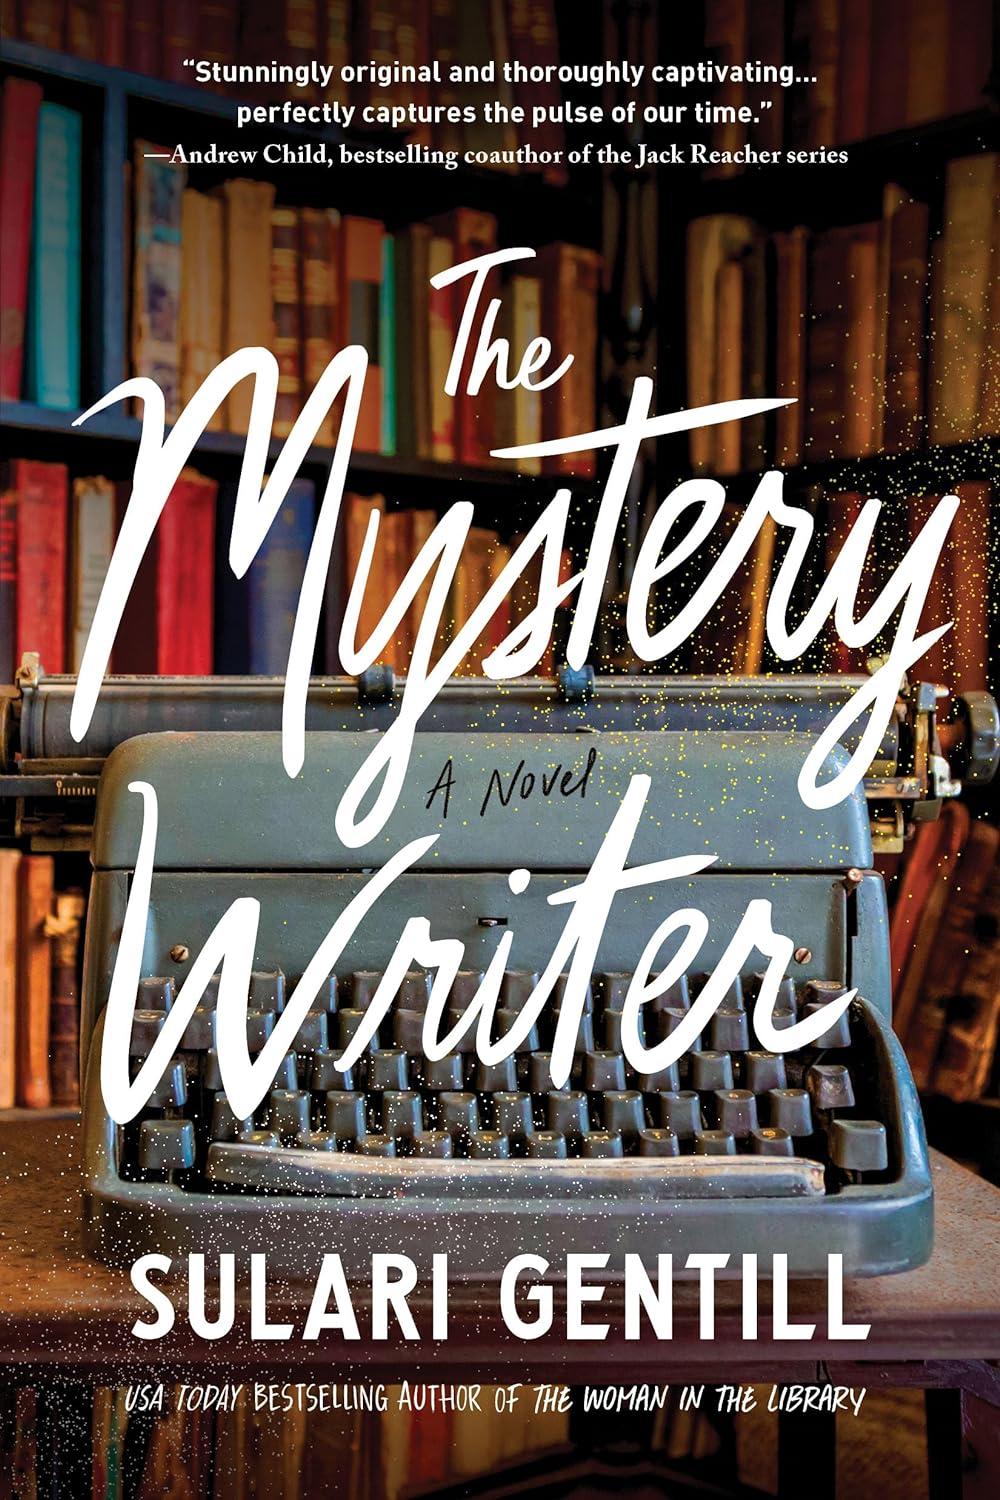 "The Mystery Writer: A Novel," by Sulari Gentill.